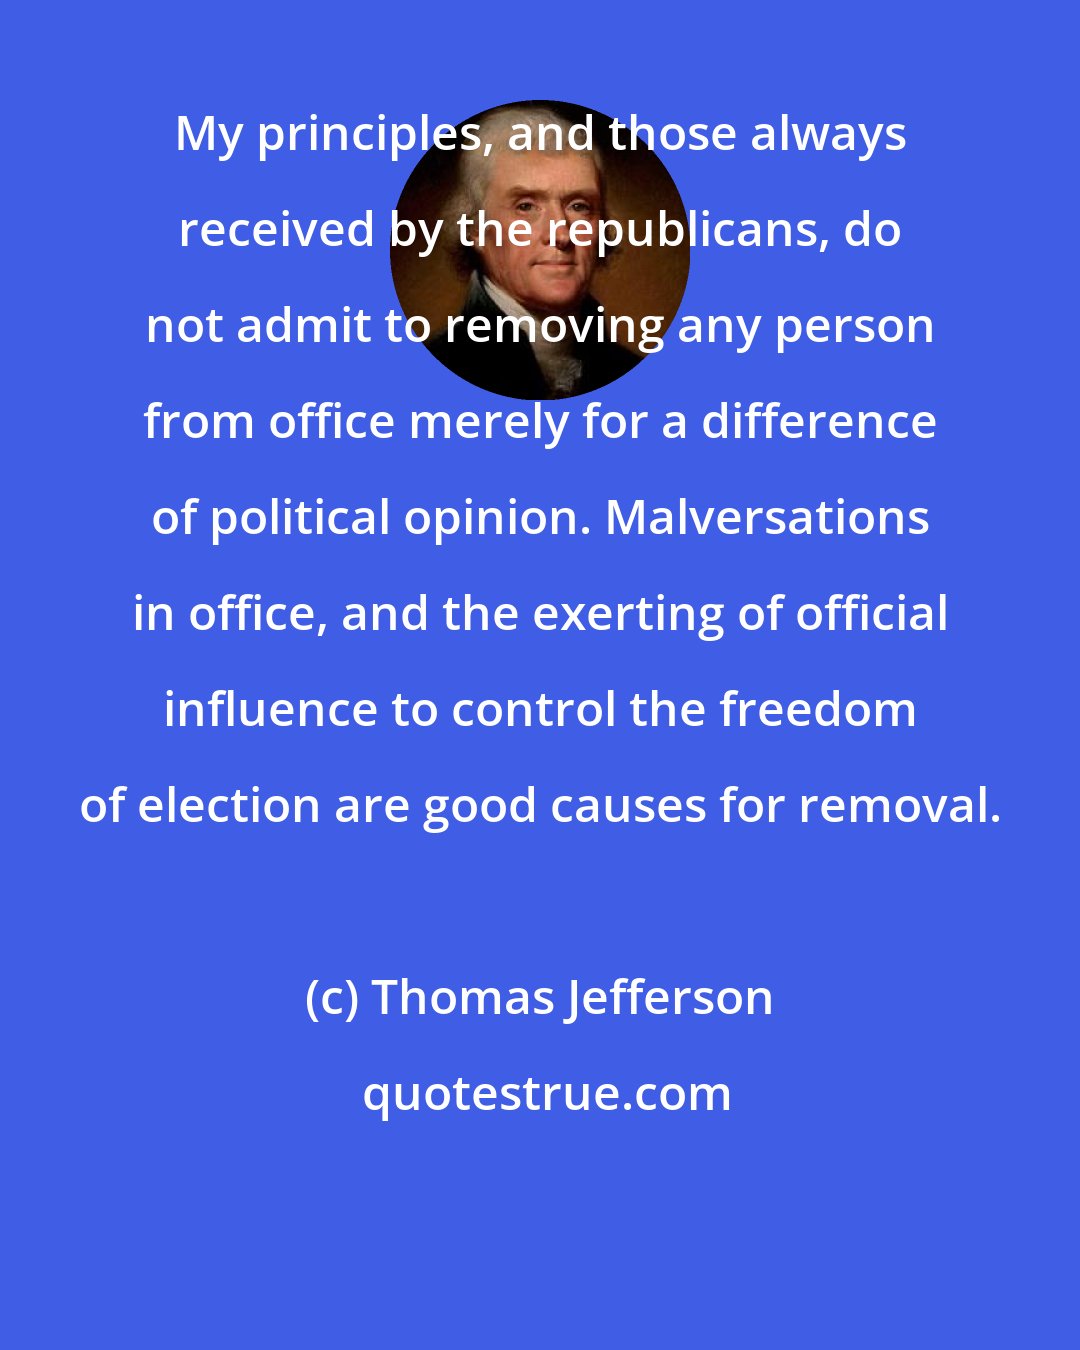 Thomas Jefferson: My principles, and those always received by the republicans, do not admit to removing any person from office merely for a difference of political opinion. Malversations in office, and the exerting of official influence to control the freedom of election are good causes for removal.